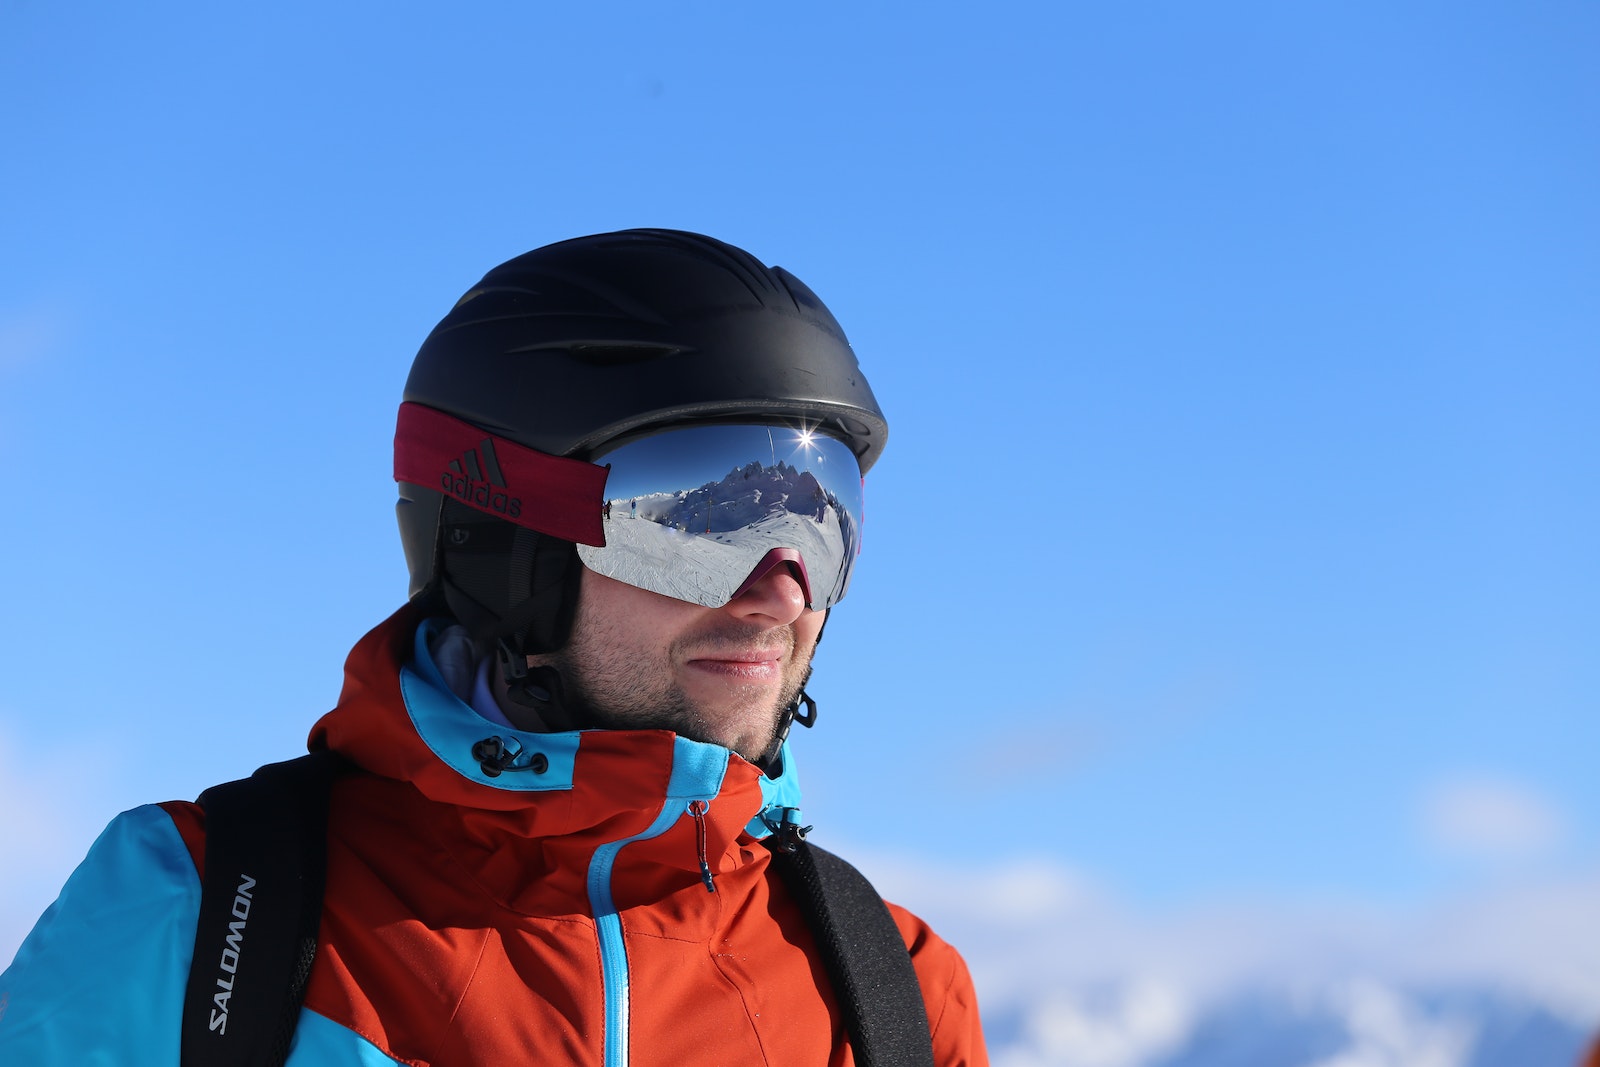 Close-Up Photo of a Man in Ski Helmet and Jacket